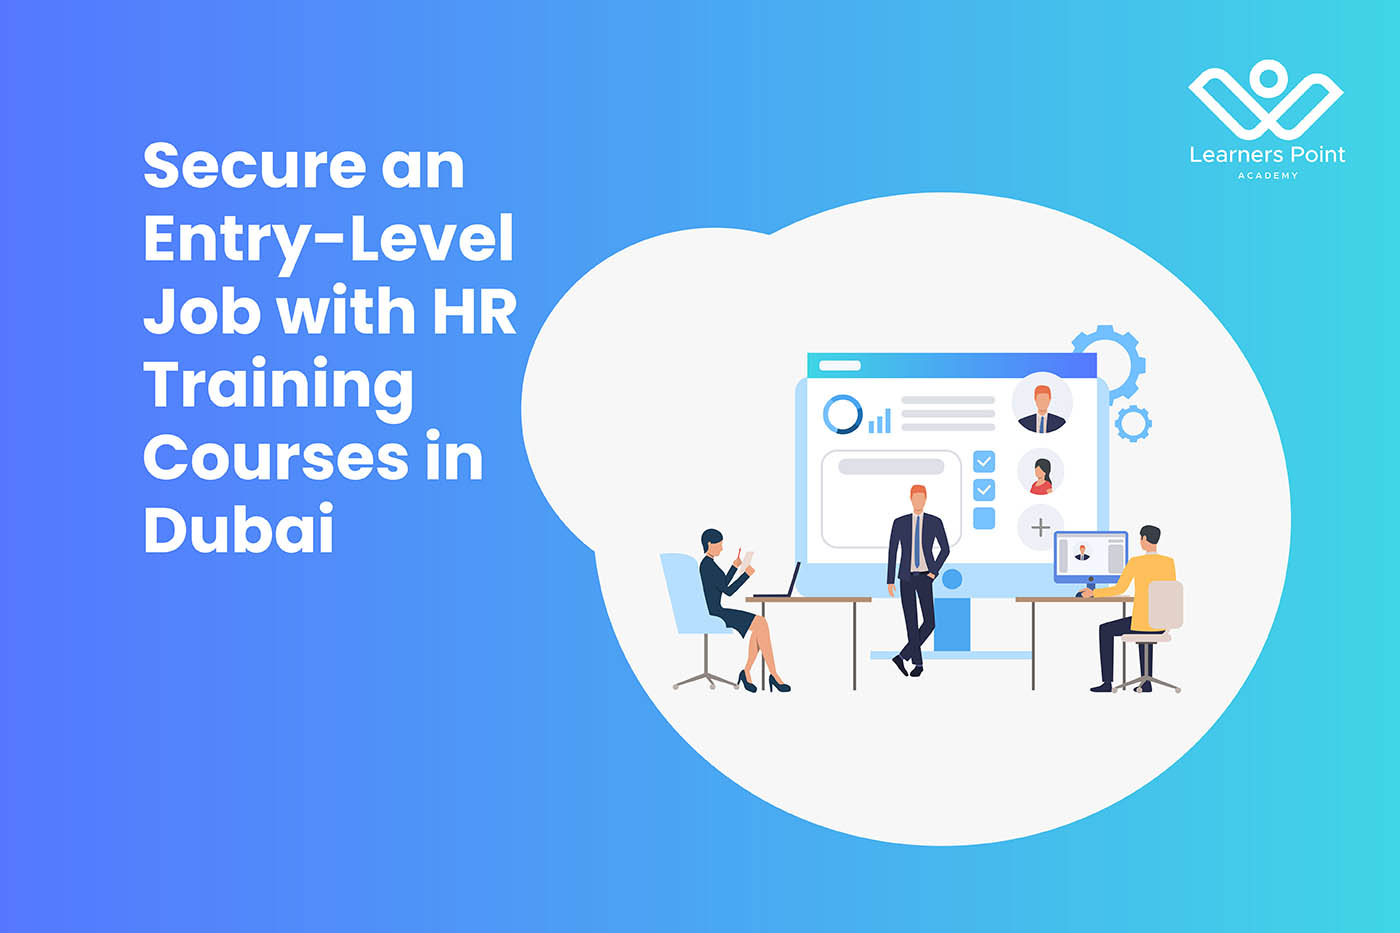 Secure an Entry-Level Job with HR Training Courses in Dubai